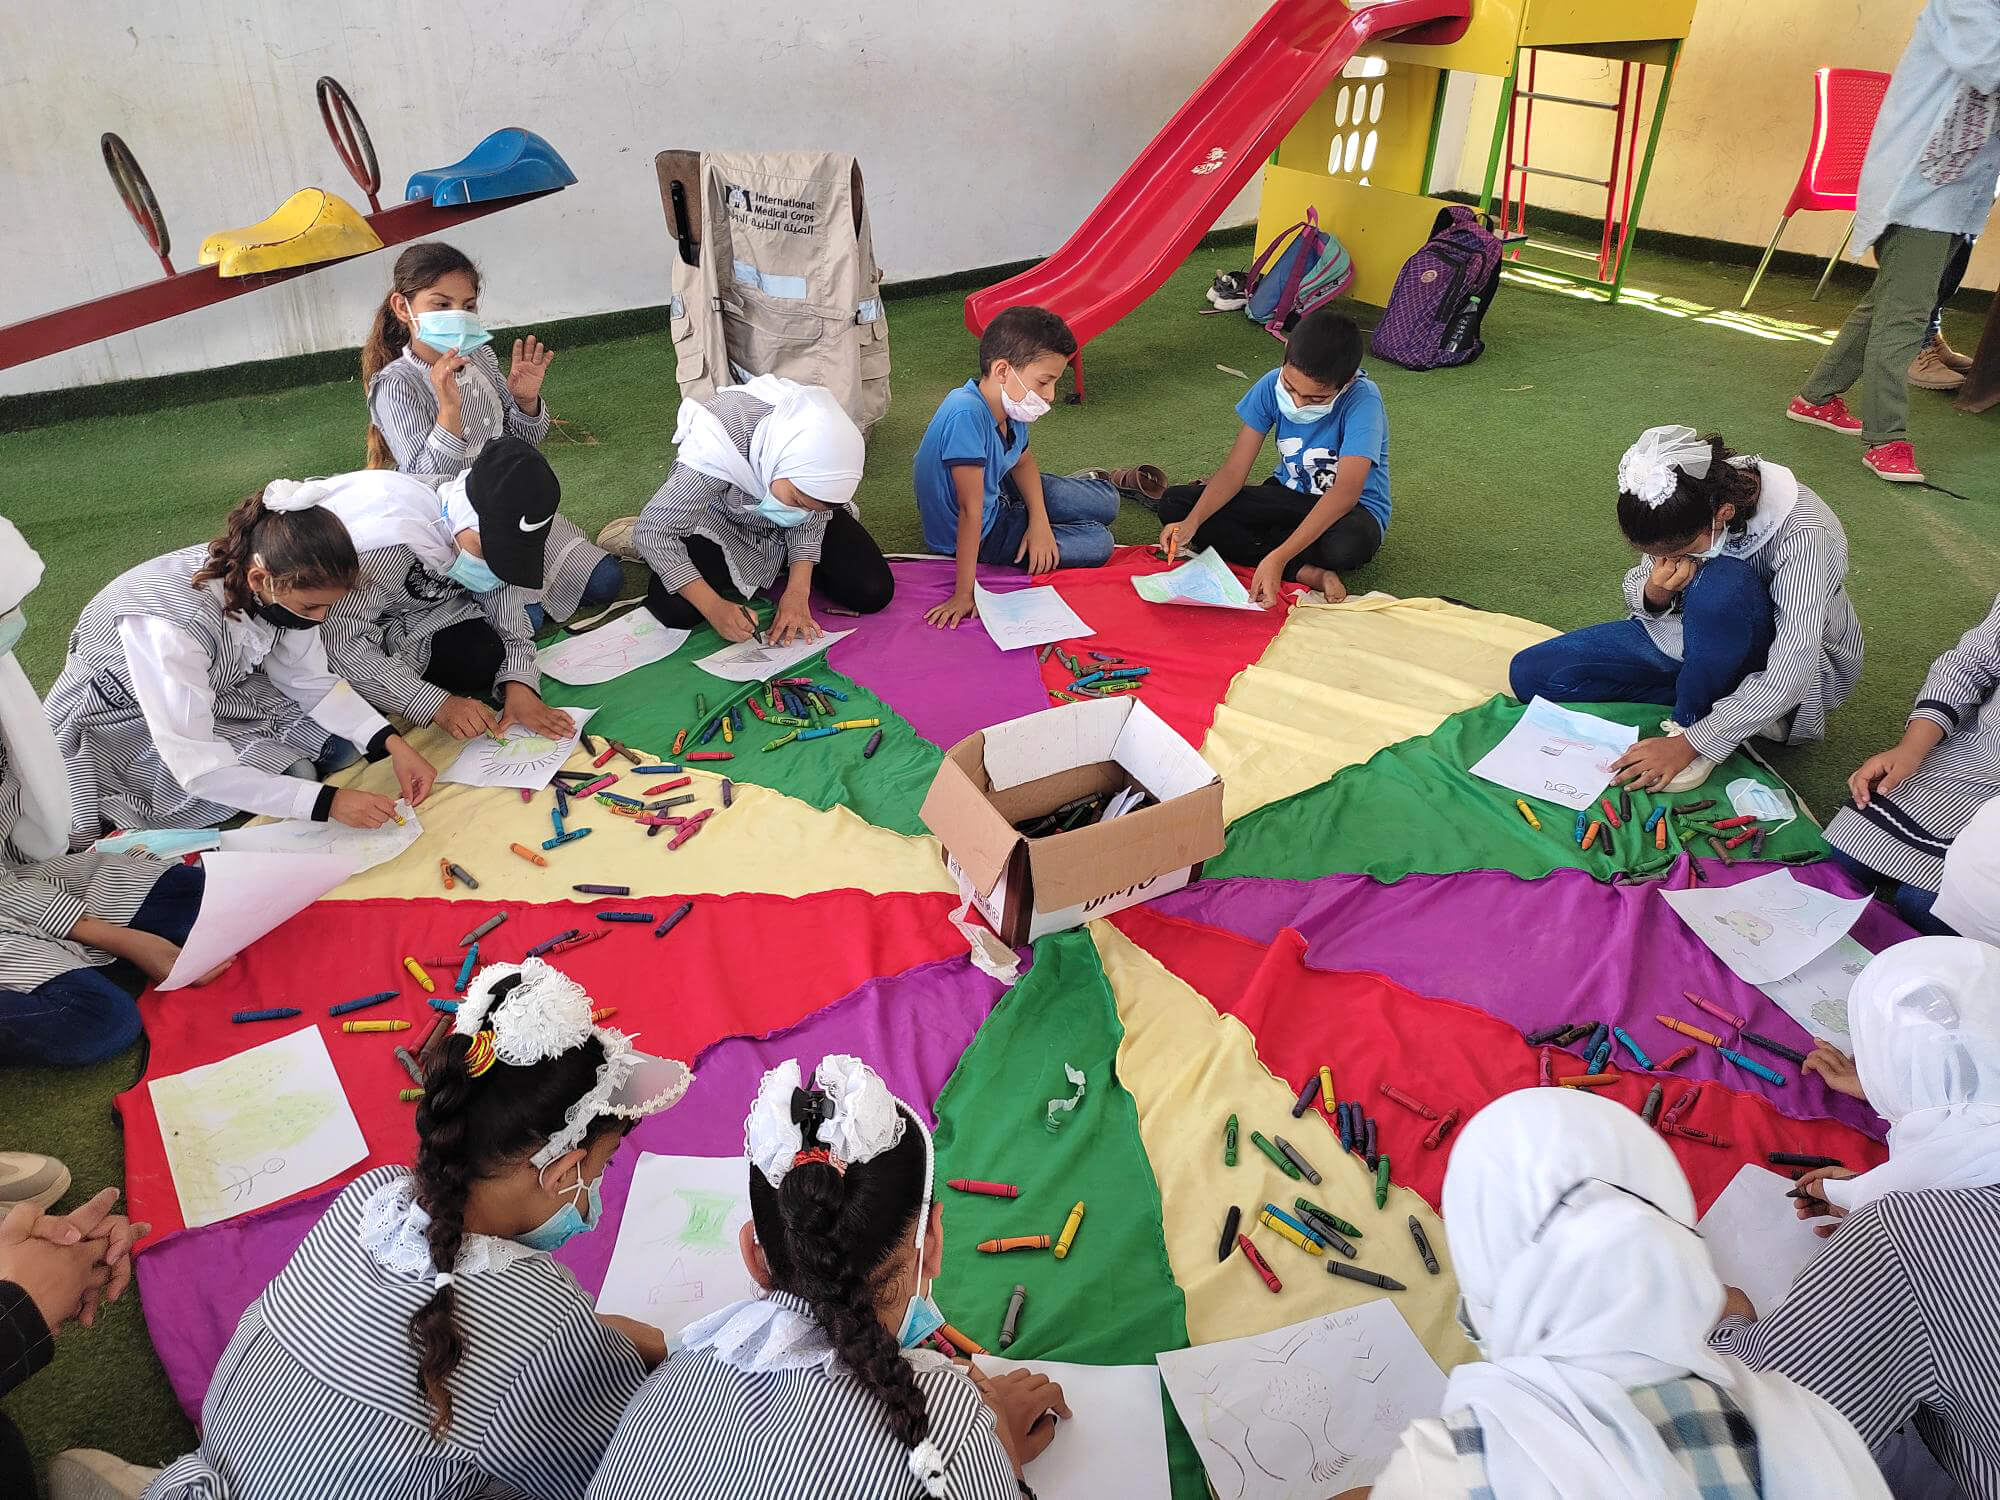 Our structured and recreational skill-building activities provide children with a safe space to learn, play and share.